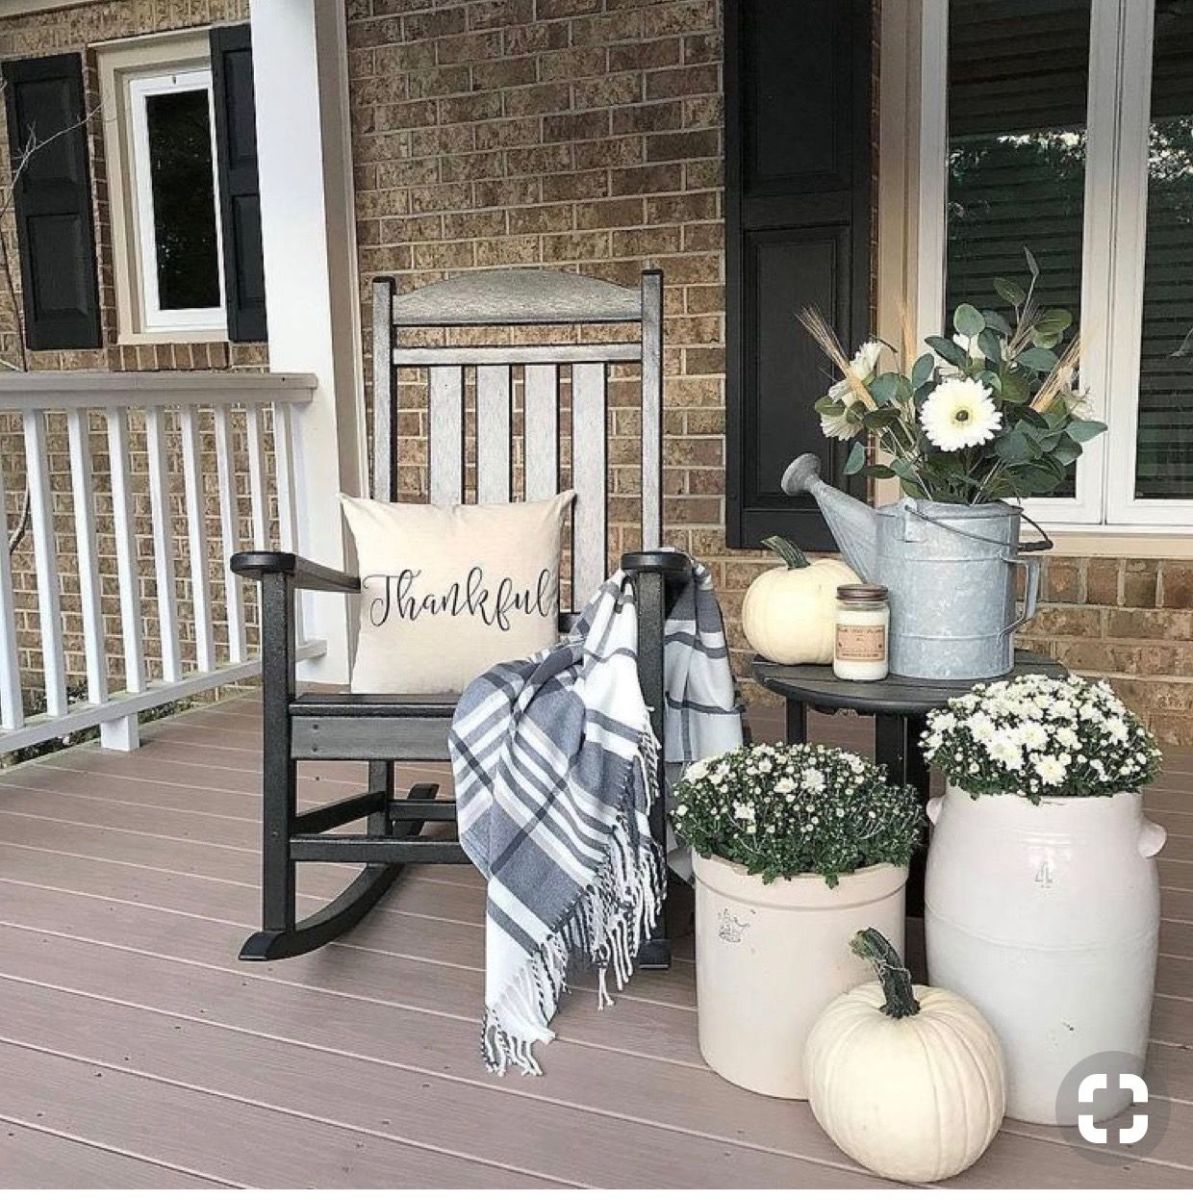 50+ Stunning DIY Fall Front Porch Decor Ideas for a Cozy, Rustic Outdoors  Vibe - FeltMagnet